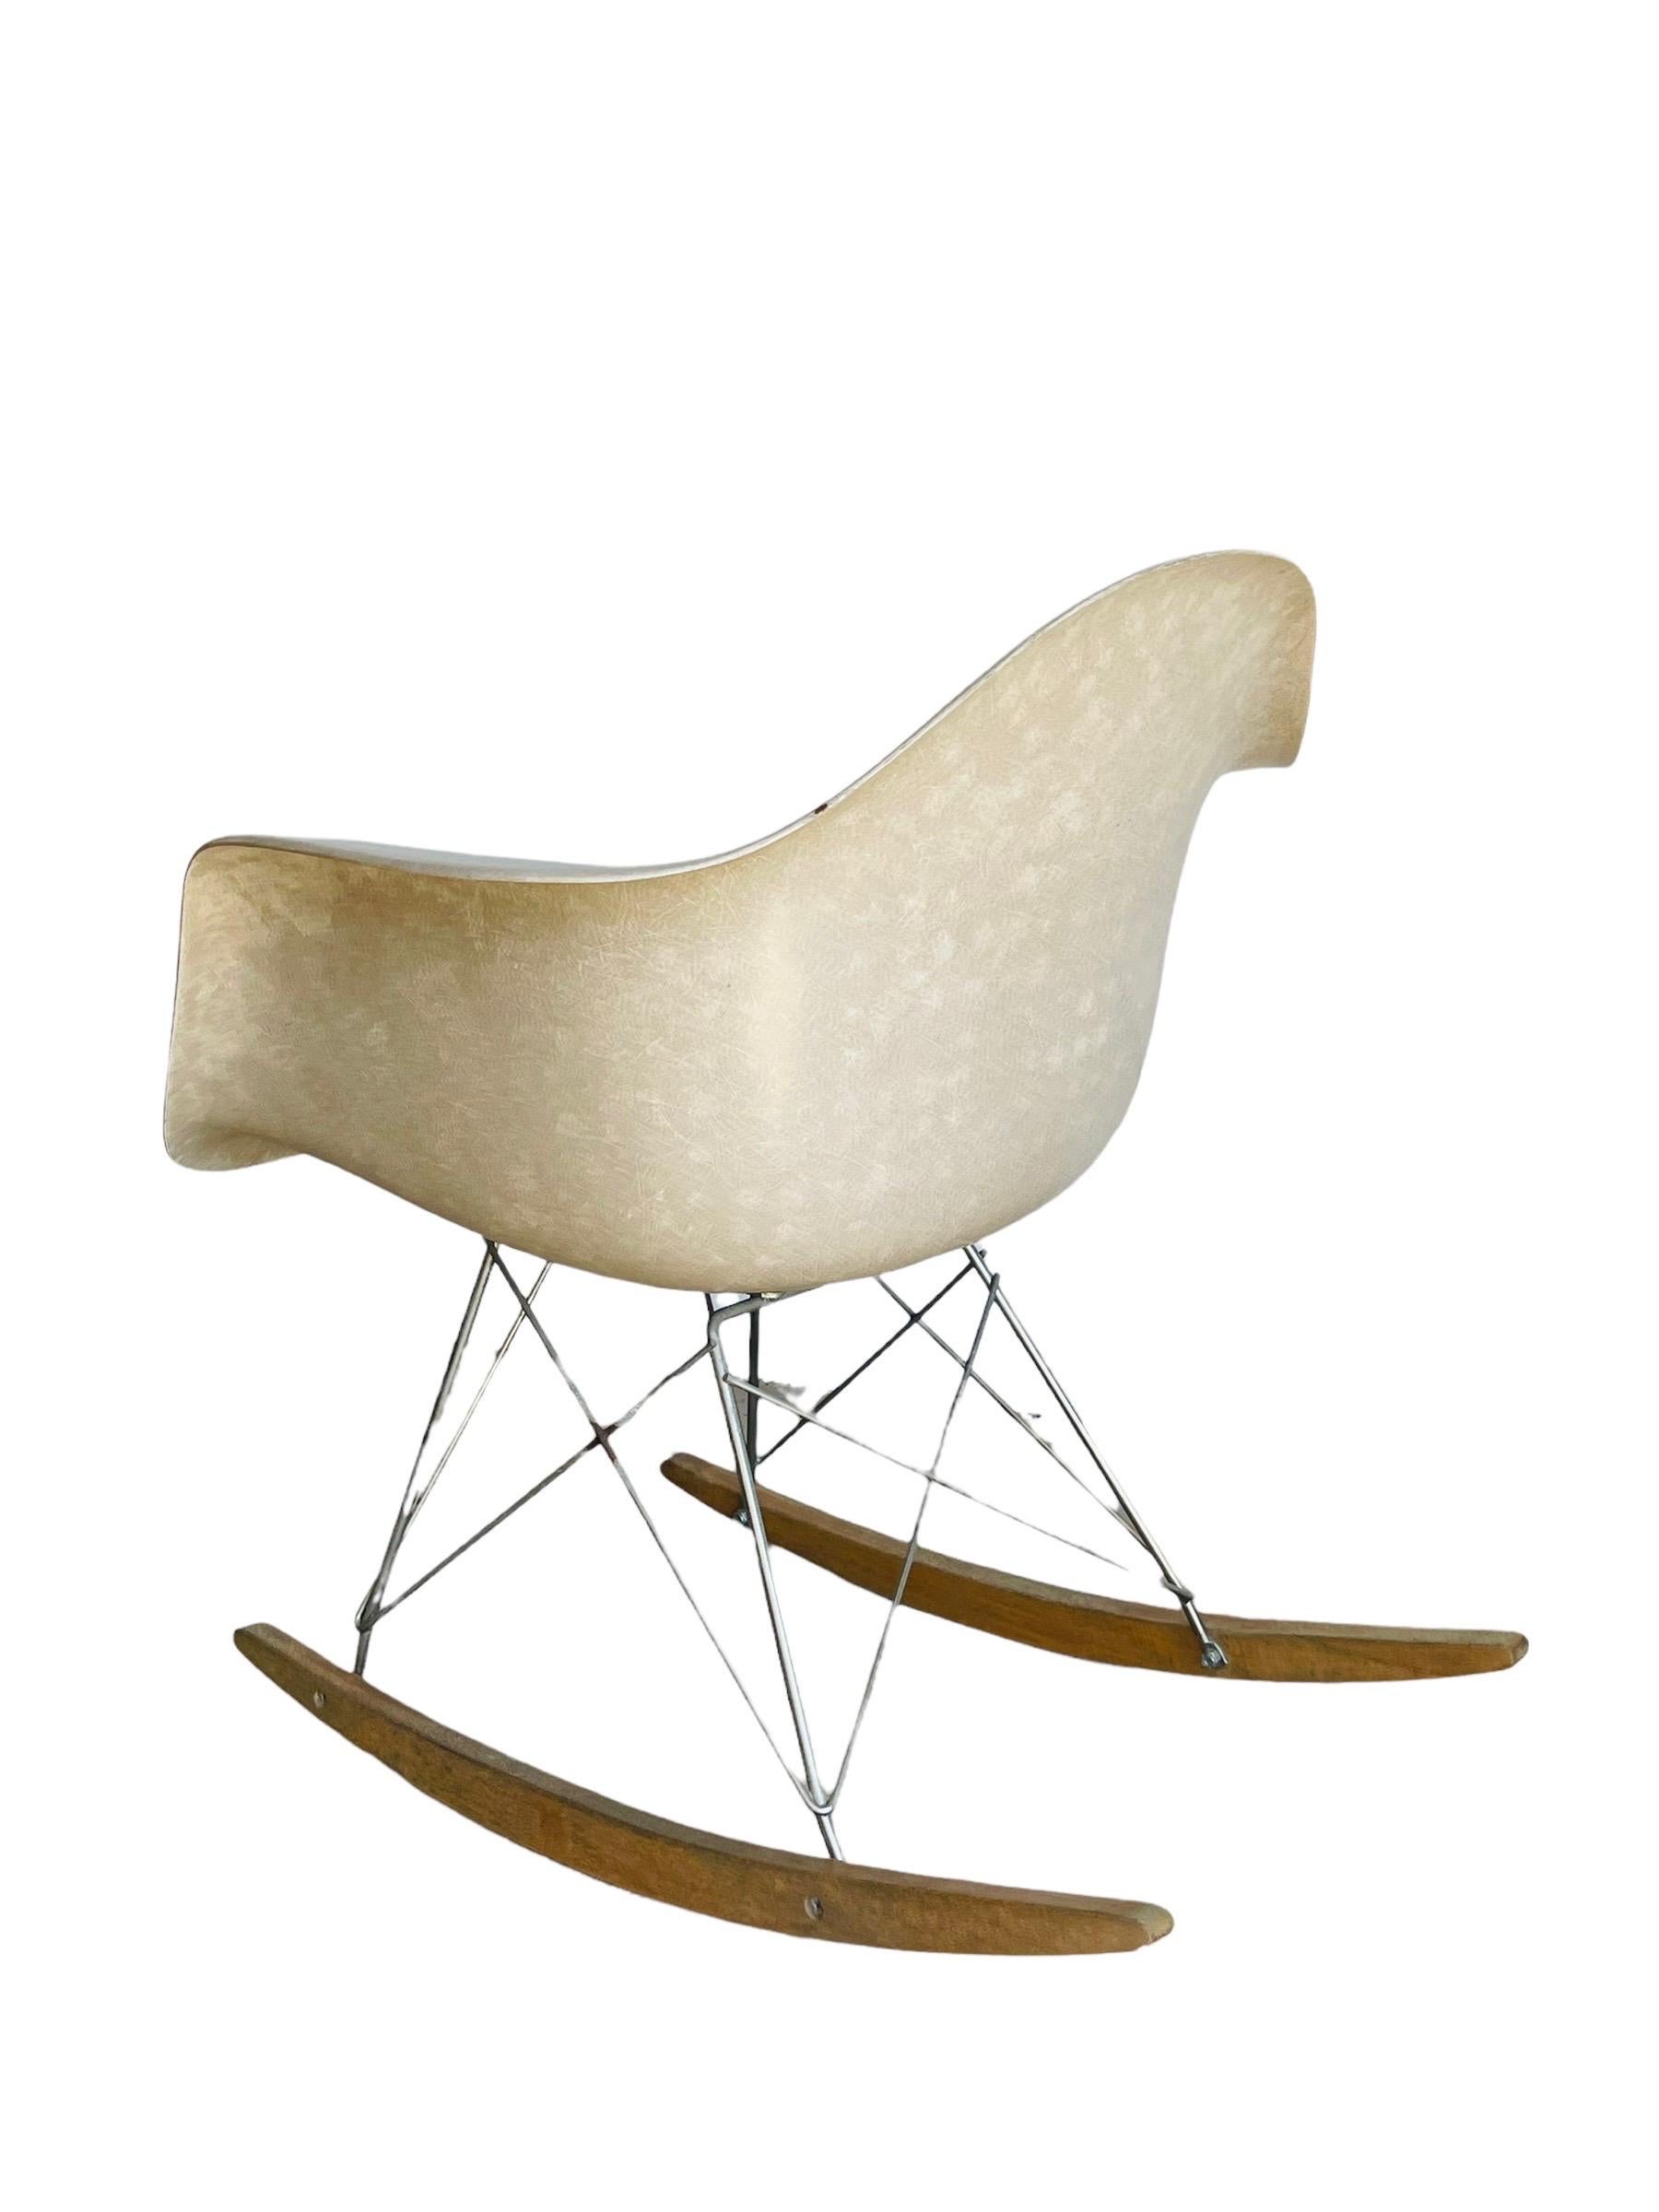 American Authentic RAR Rocking Chair by Charles & Ray Eames for Herman Miller, 1960s For Sale